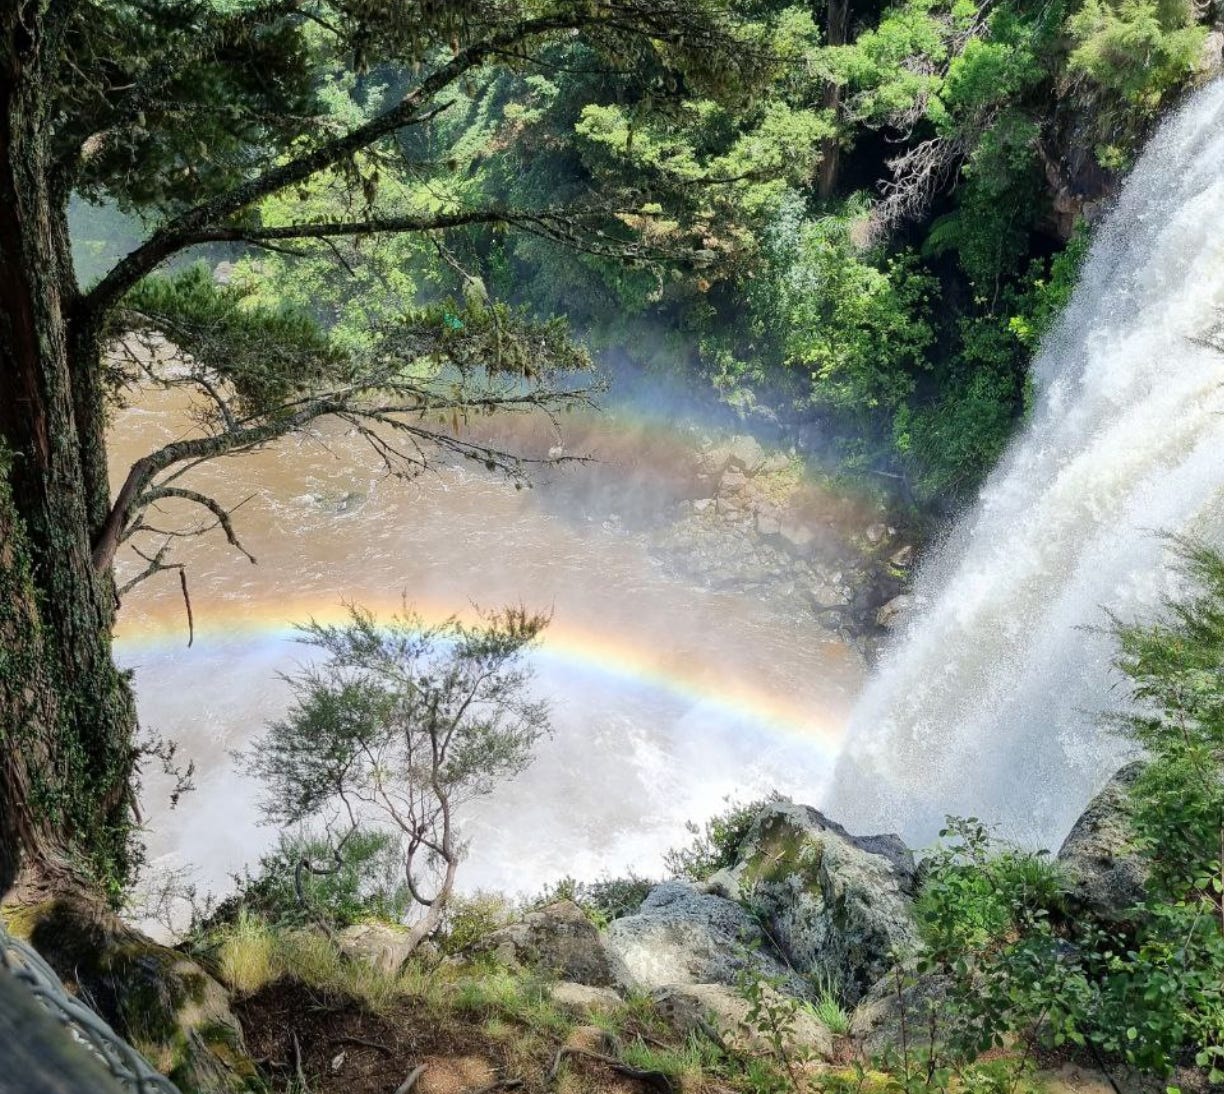 A photo view down onto a waterfall surrounded by trees and bush, with a double rainbow at the bottom in the spray of the waterfall.